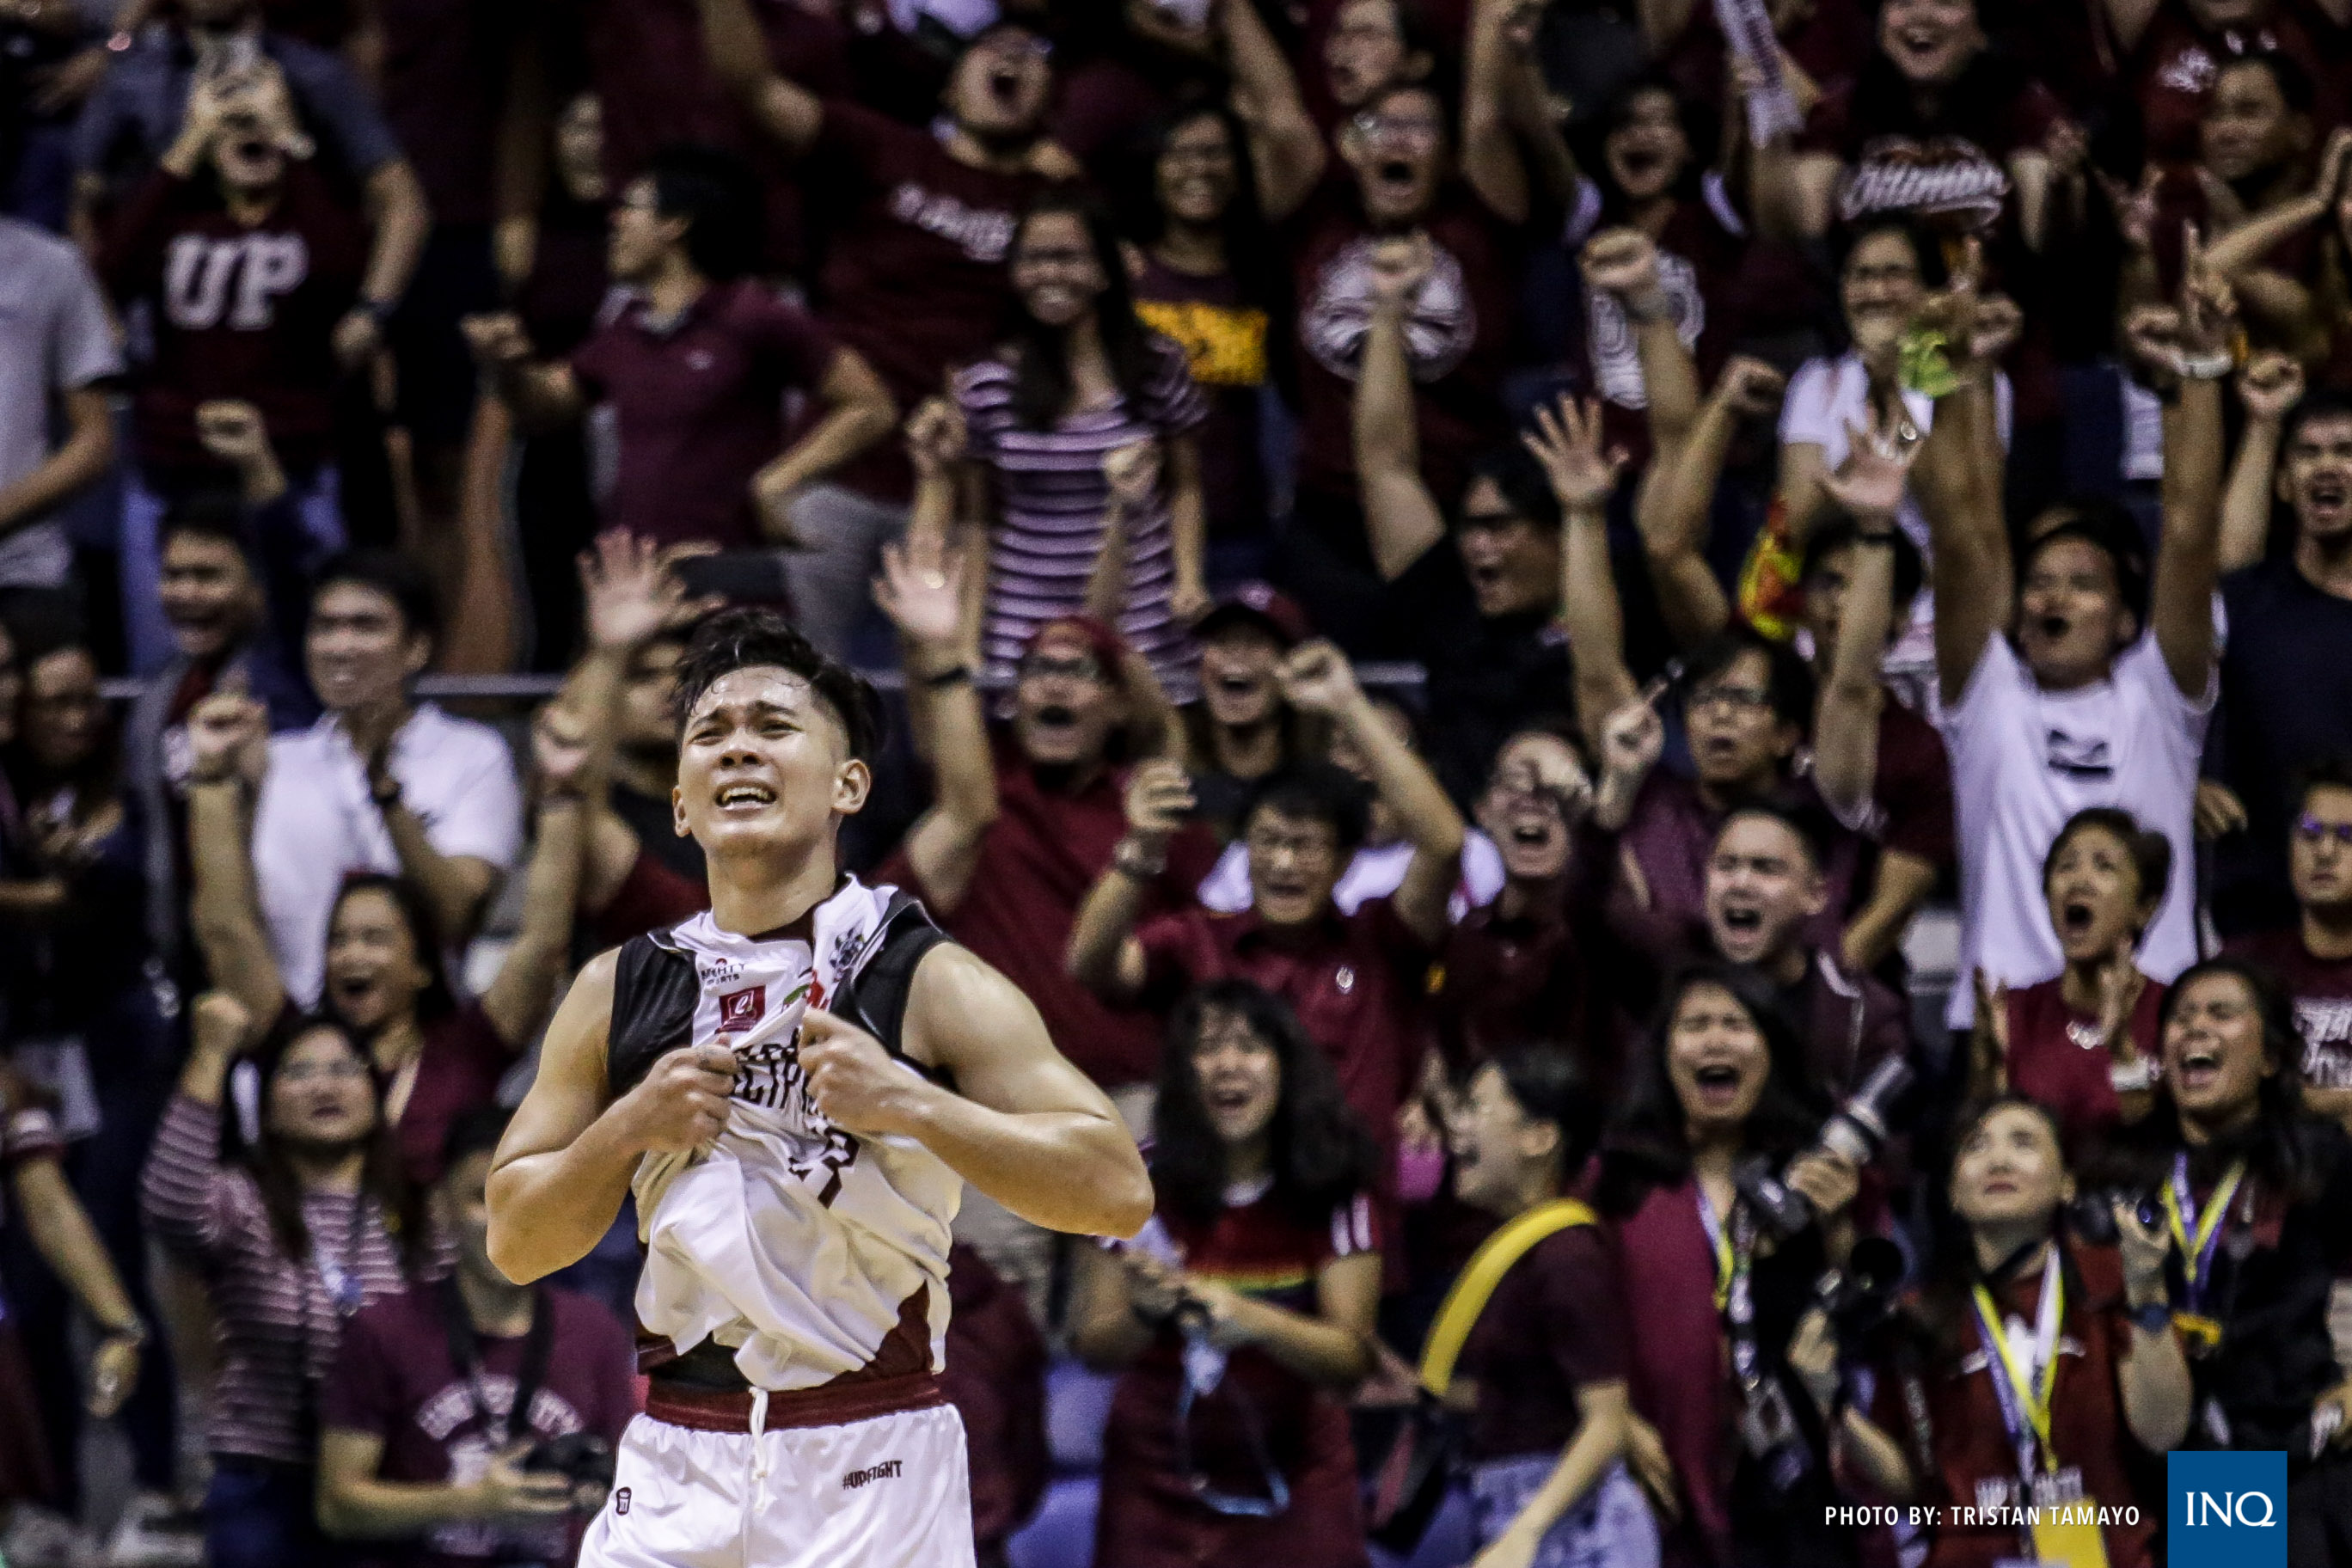 UP Maroons 